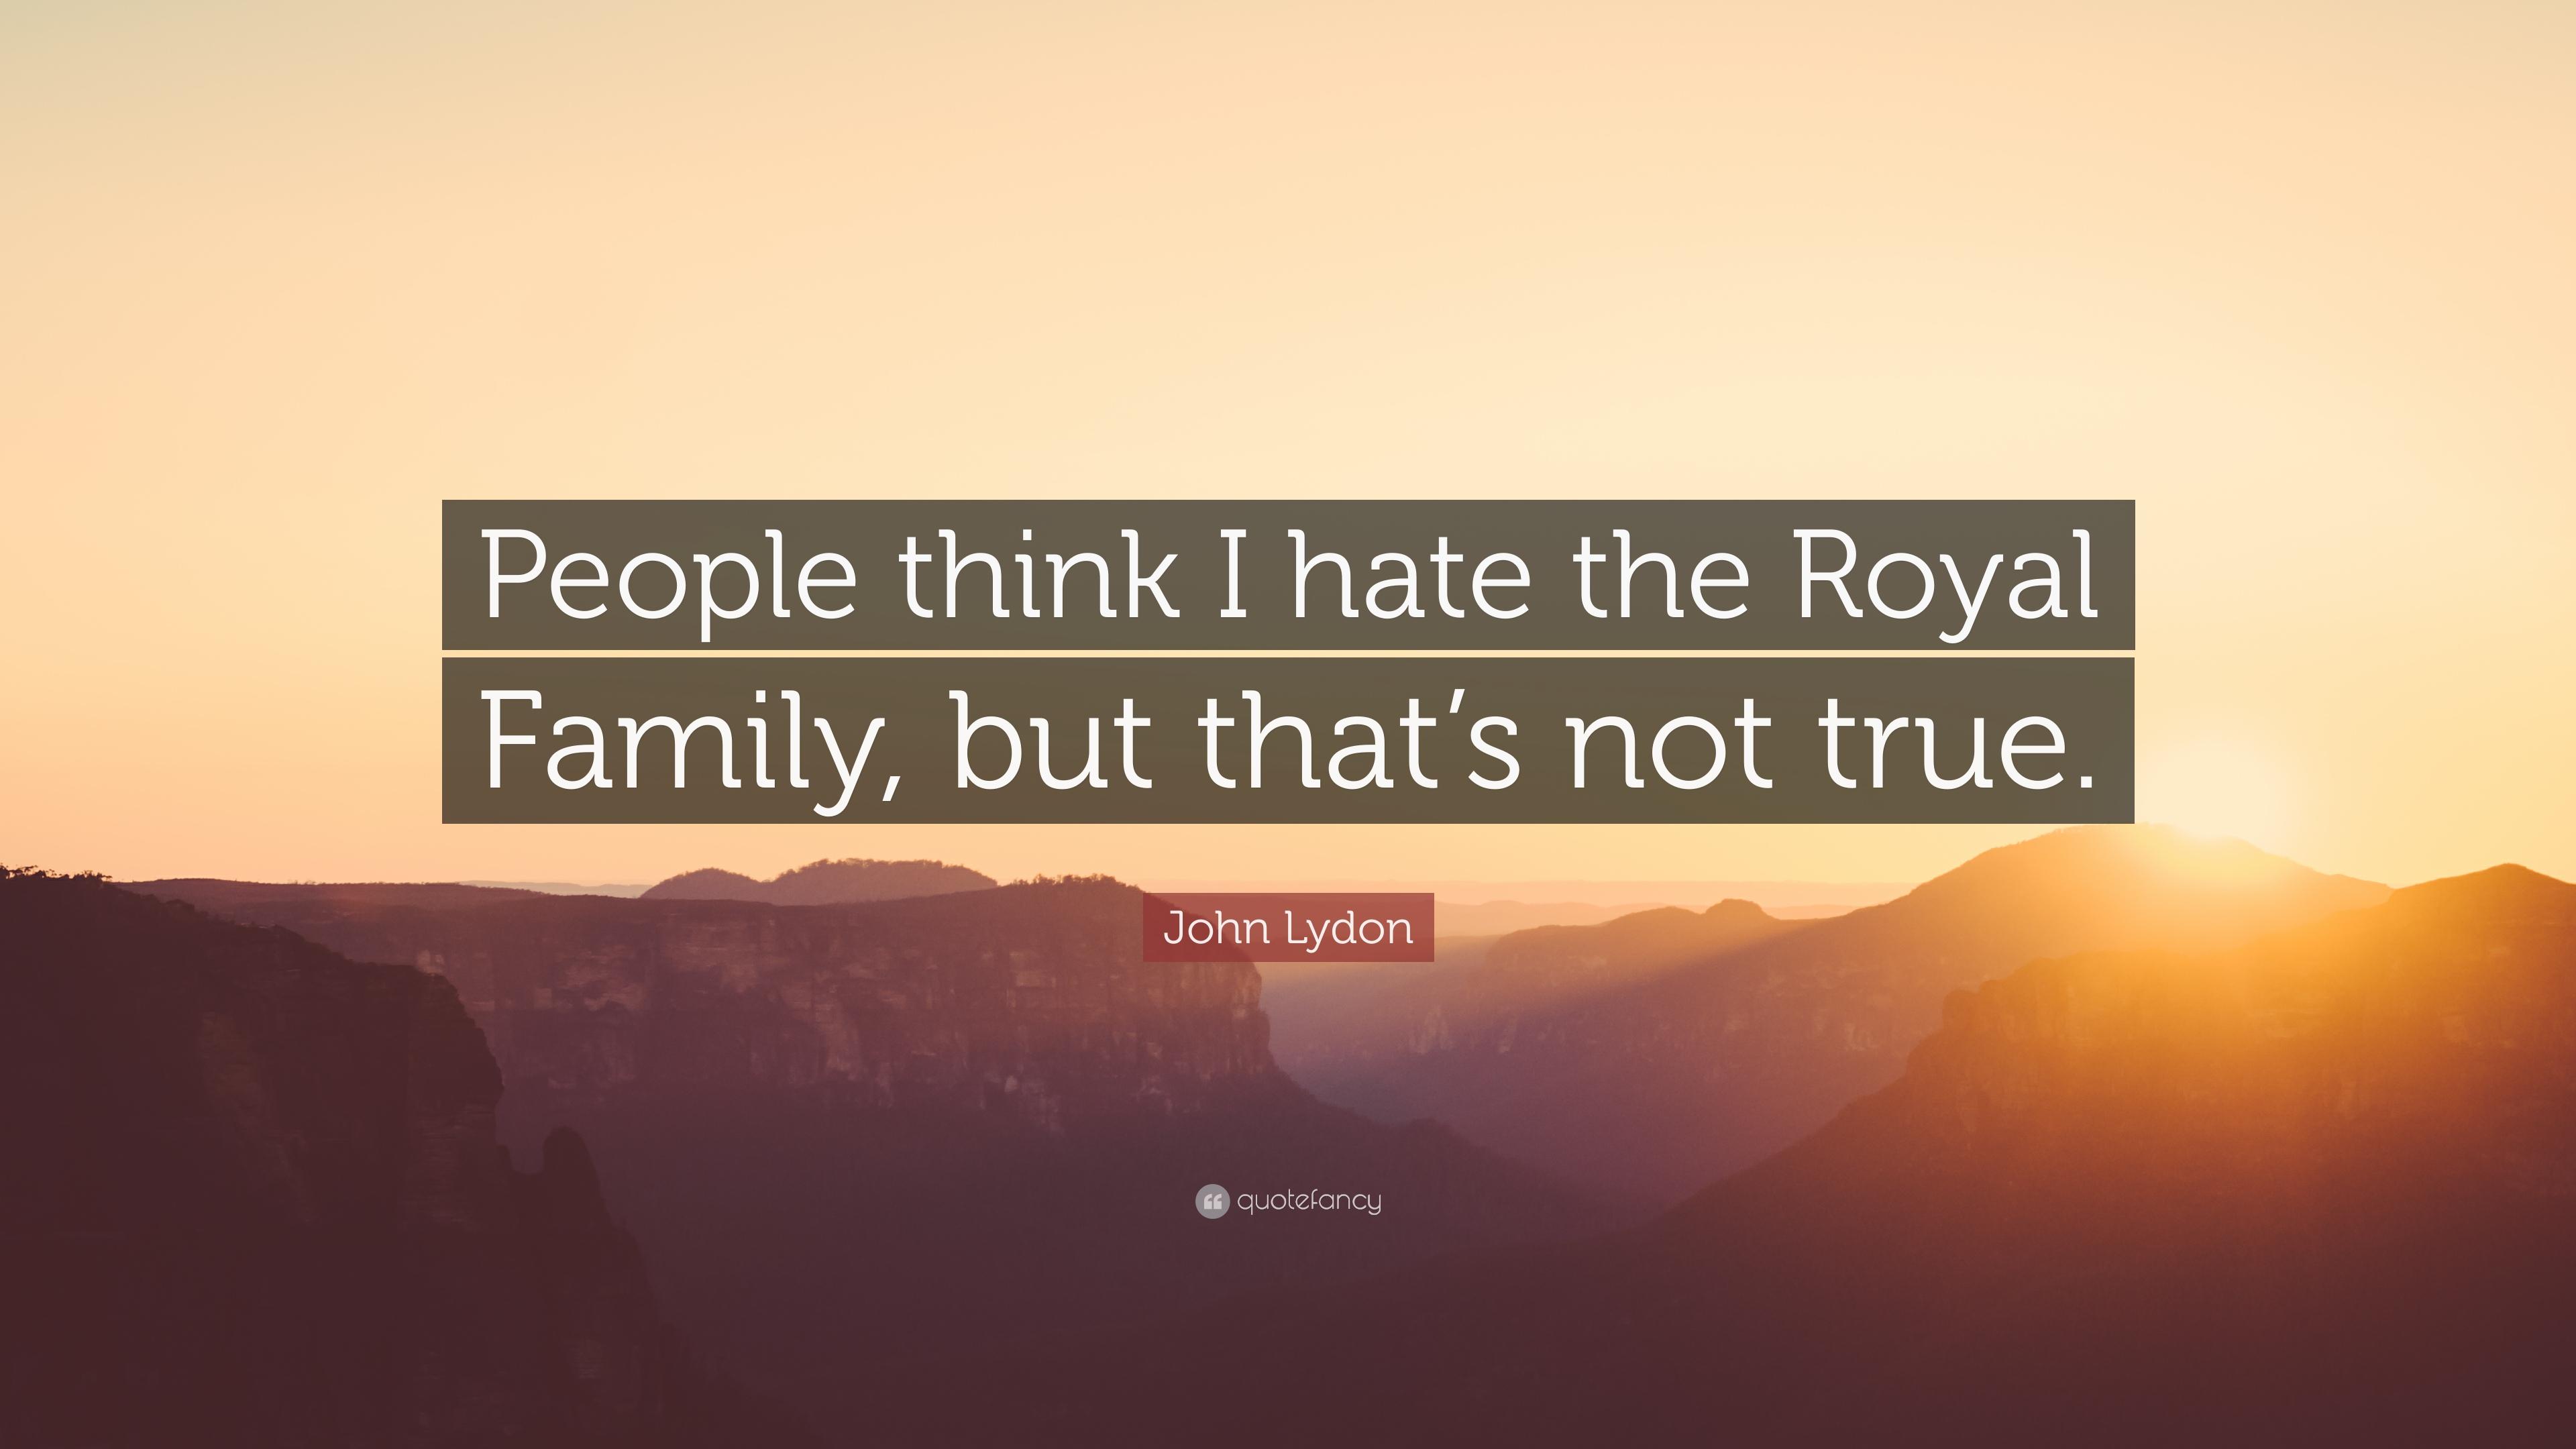 John Lydon Quote: “People think I hate the Royal Family, but that's